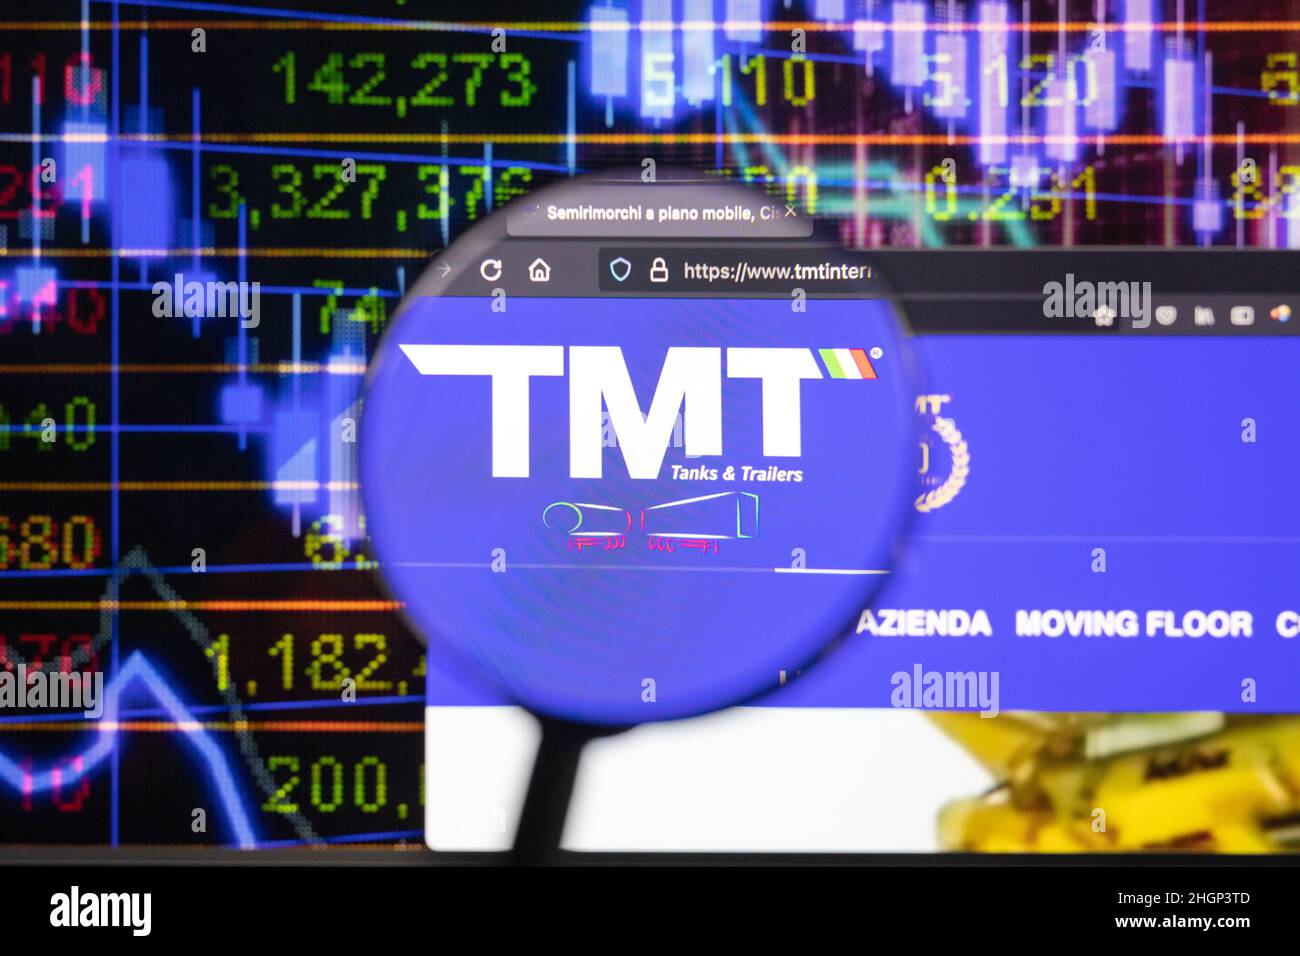 TMT company logo on a website with blurry stock market developments in the background, seen on a computer screen through a magnifying glass. Stock Photo